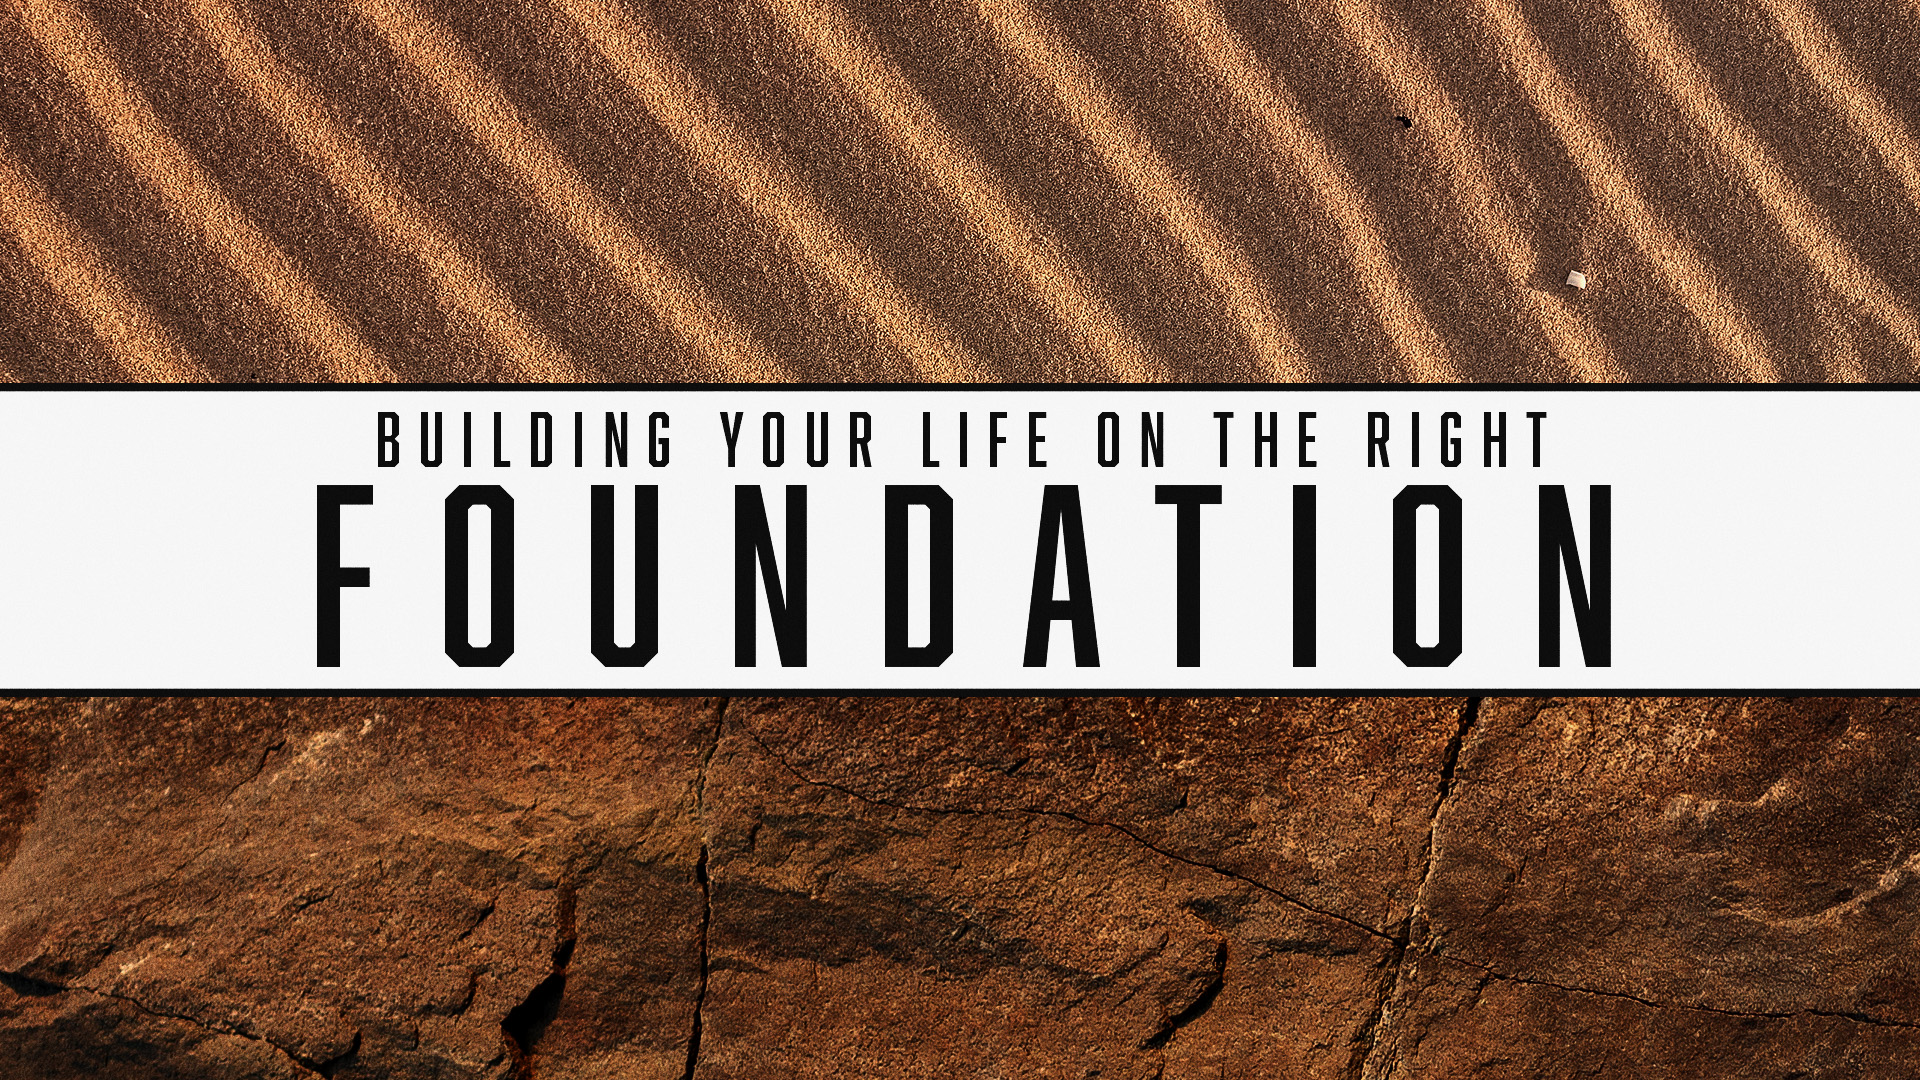 Building Your Life on the Right Foundation